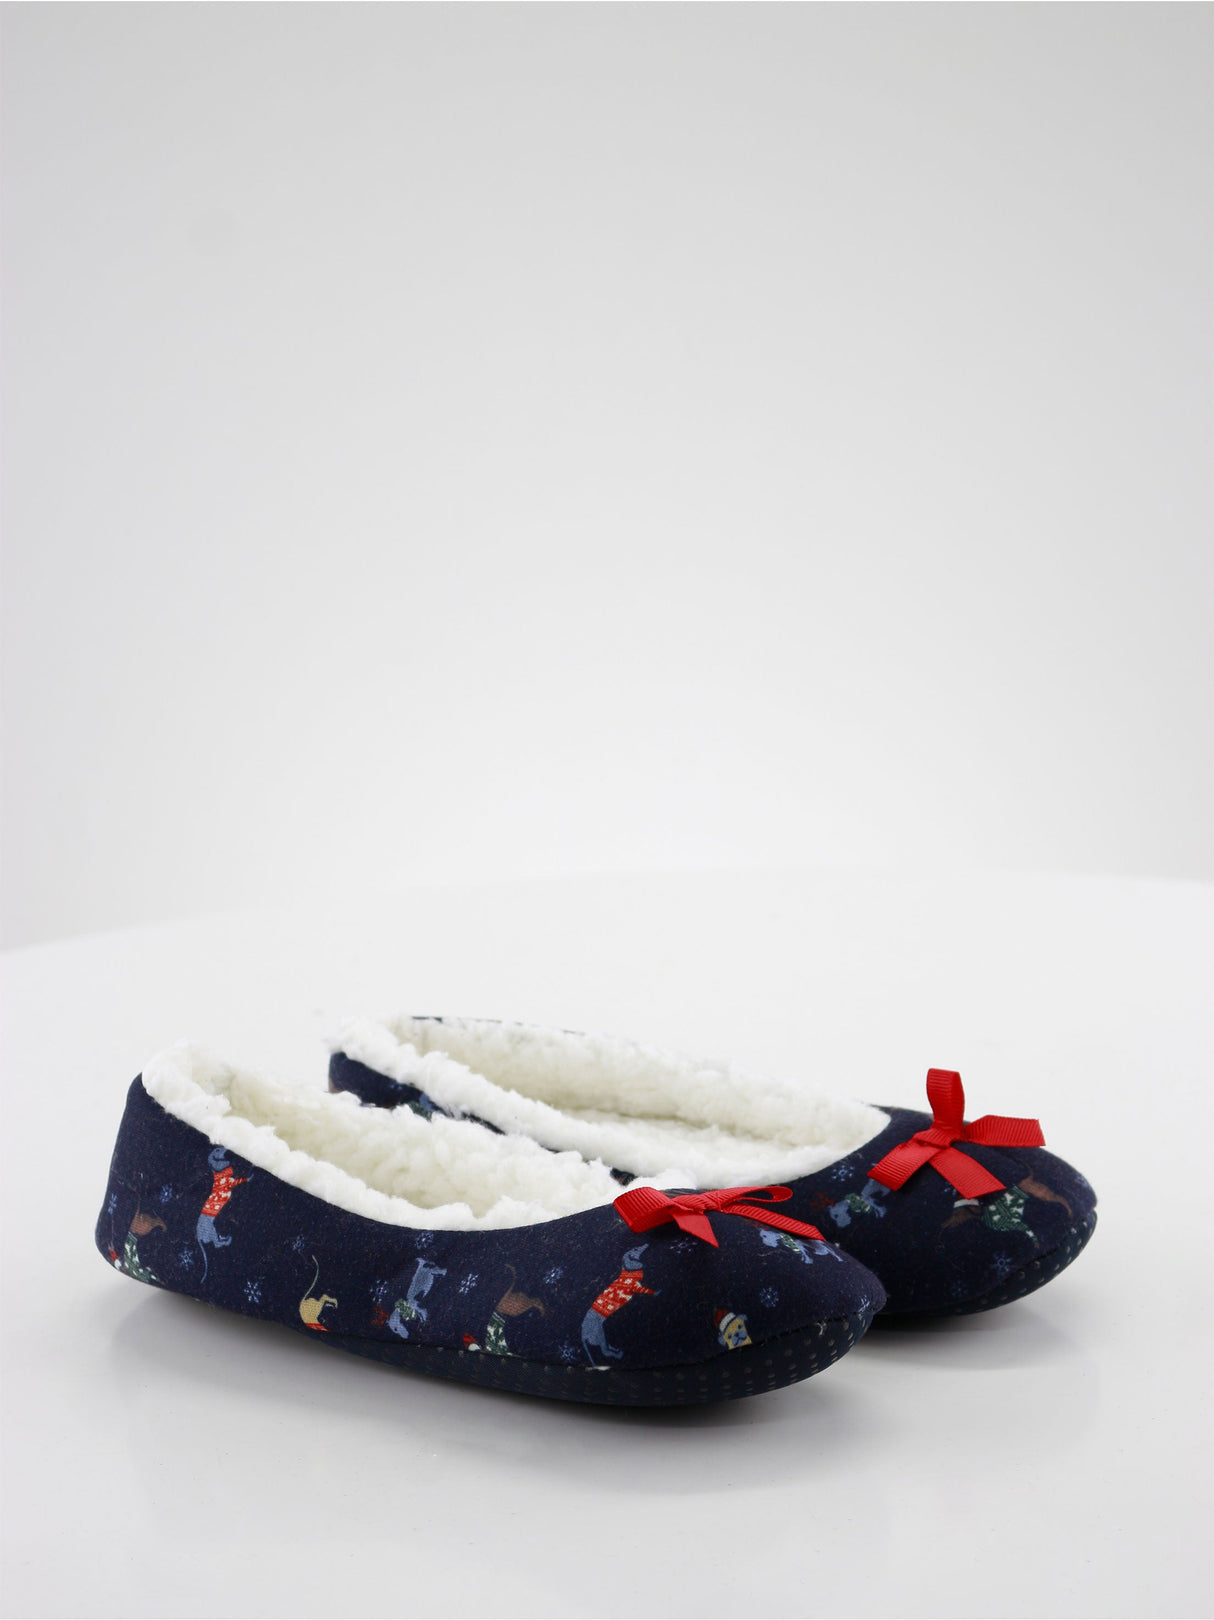 Image for Women's Christmas Decoration Faux Fur Inside Slippers,Navy